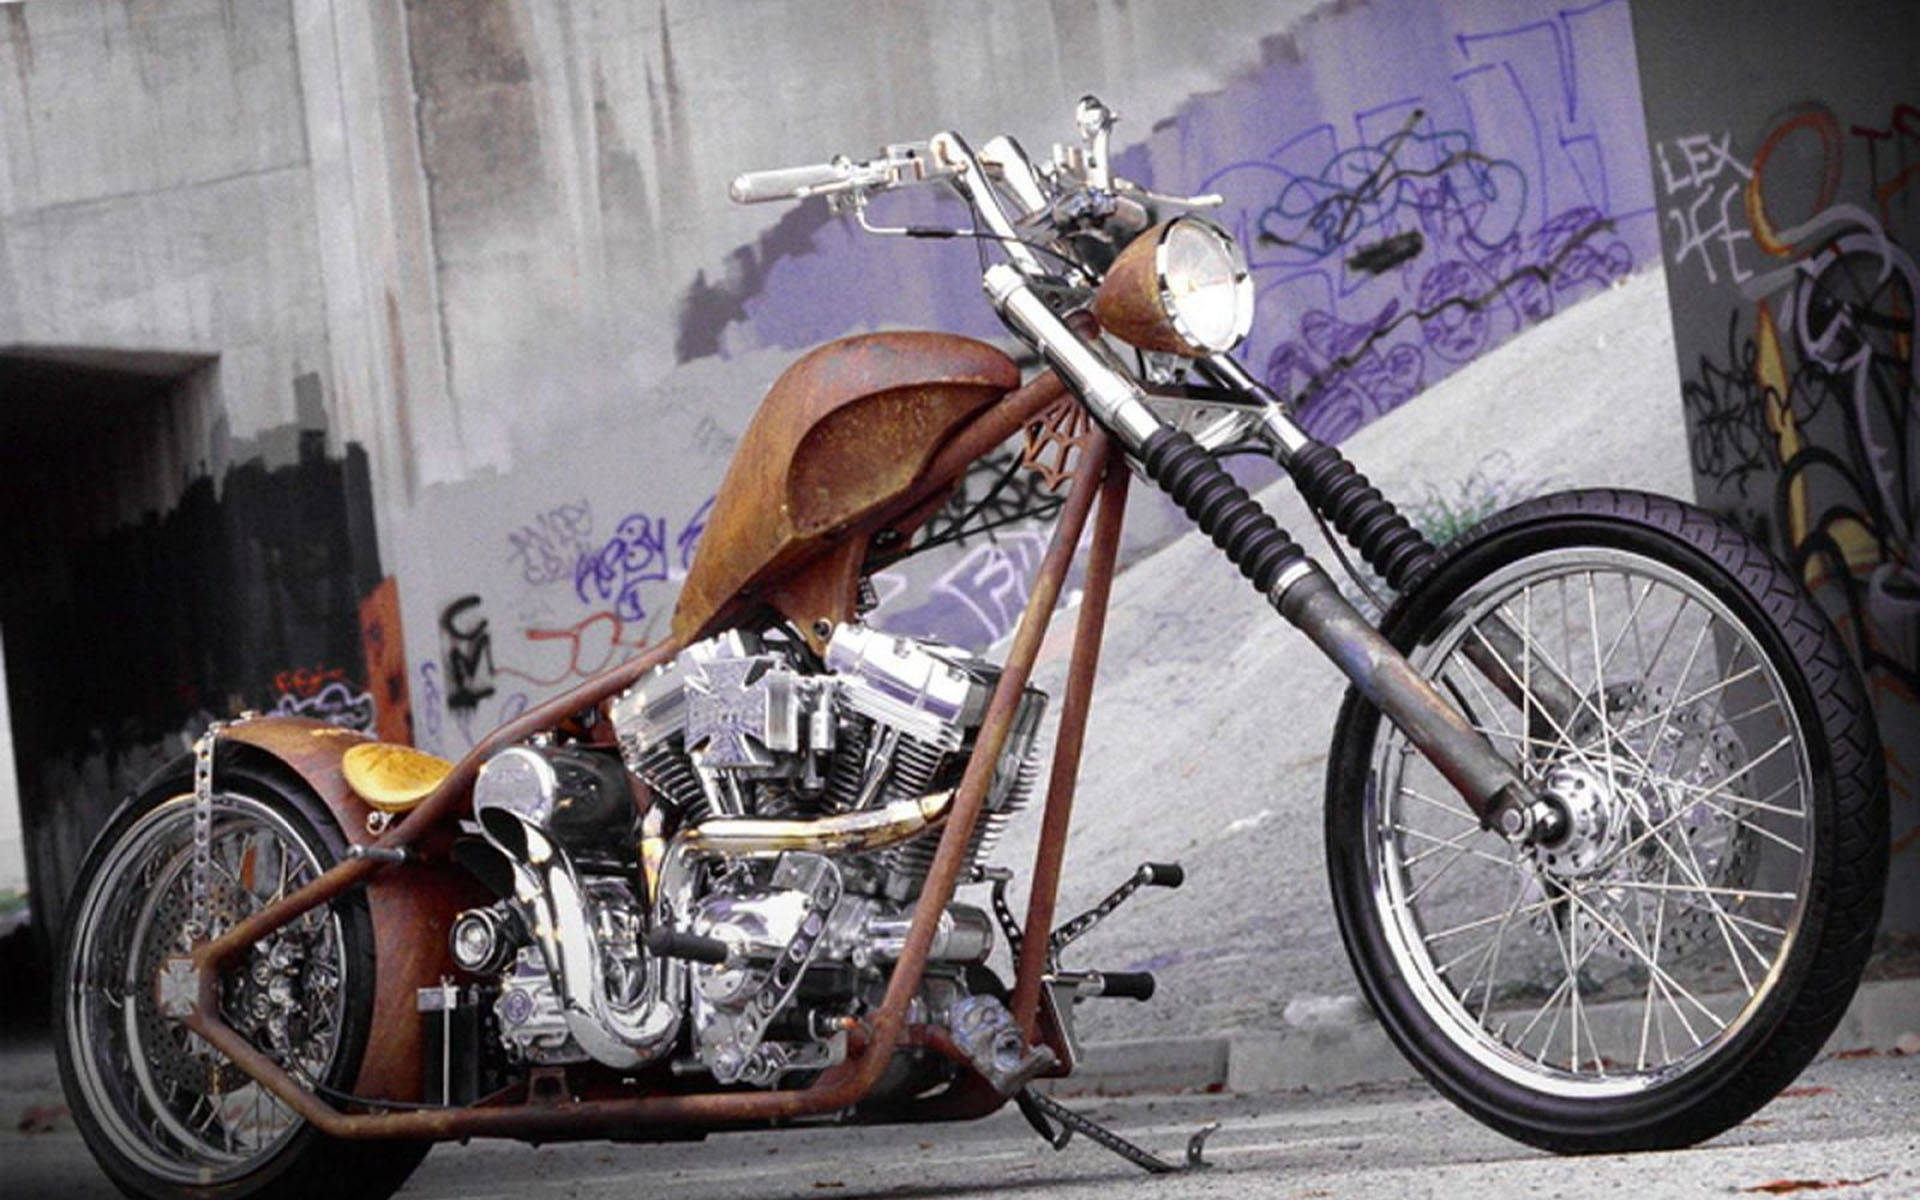 West Coast Choppers Rustic Motorcycle Background